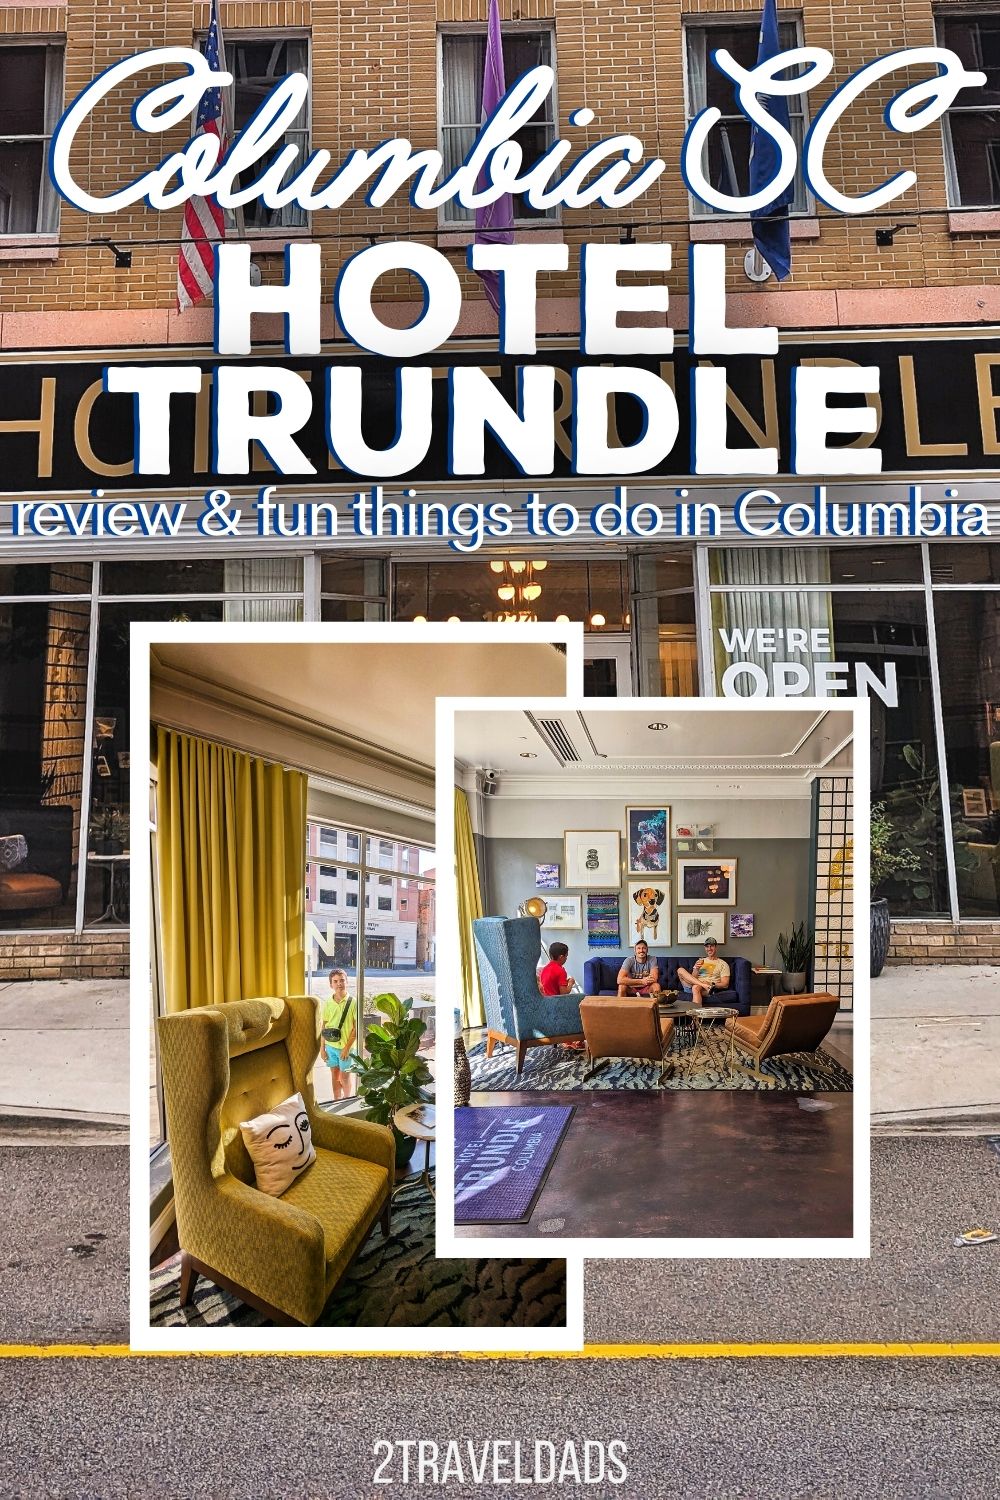 The Hotel Trundle in downtown Columbia SC is one of the most unique family-friendly boutique hotels we've stayed at. This historic collection of building is in the heart of the South Carolina capital city with fun and food all around.